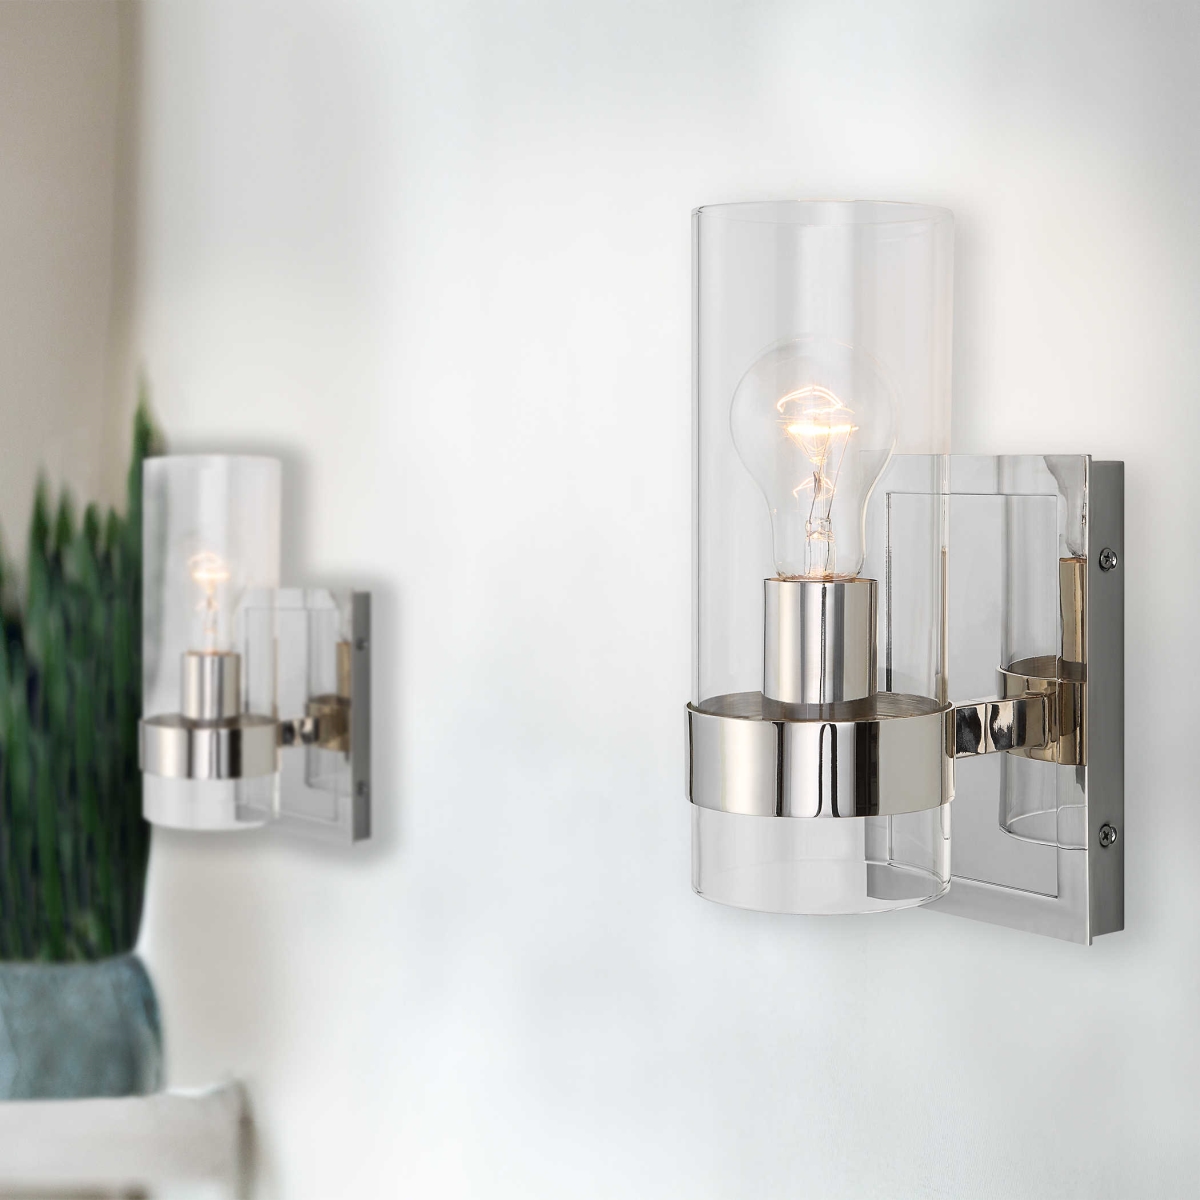 Picture of Uttermost 22550 Cardiff 1 Light Cylinder Sconce, Polished Nickel